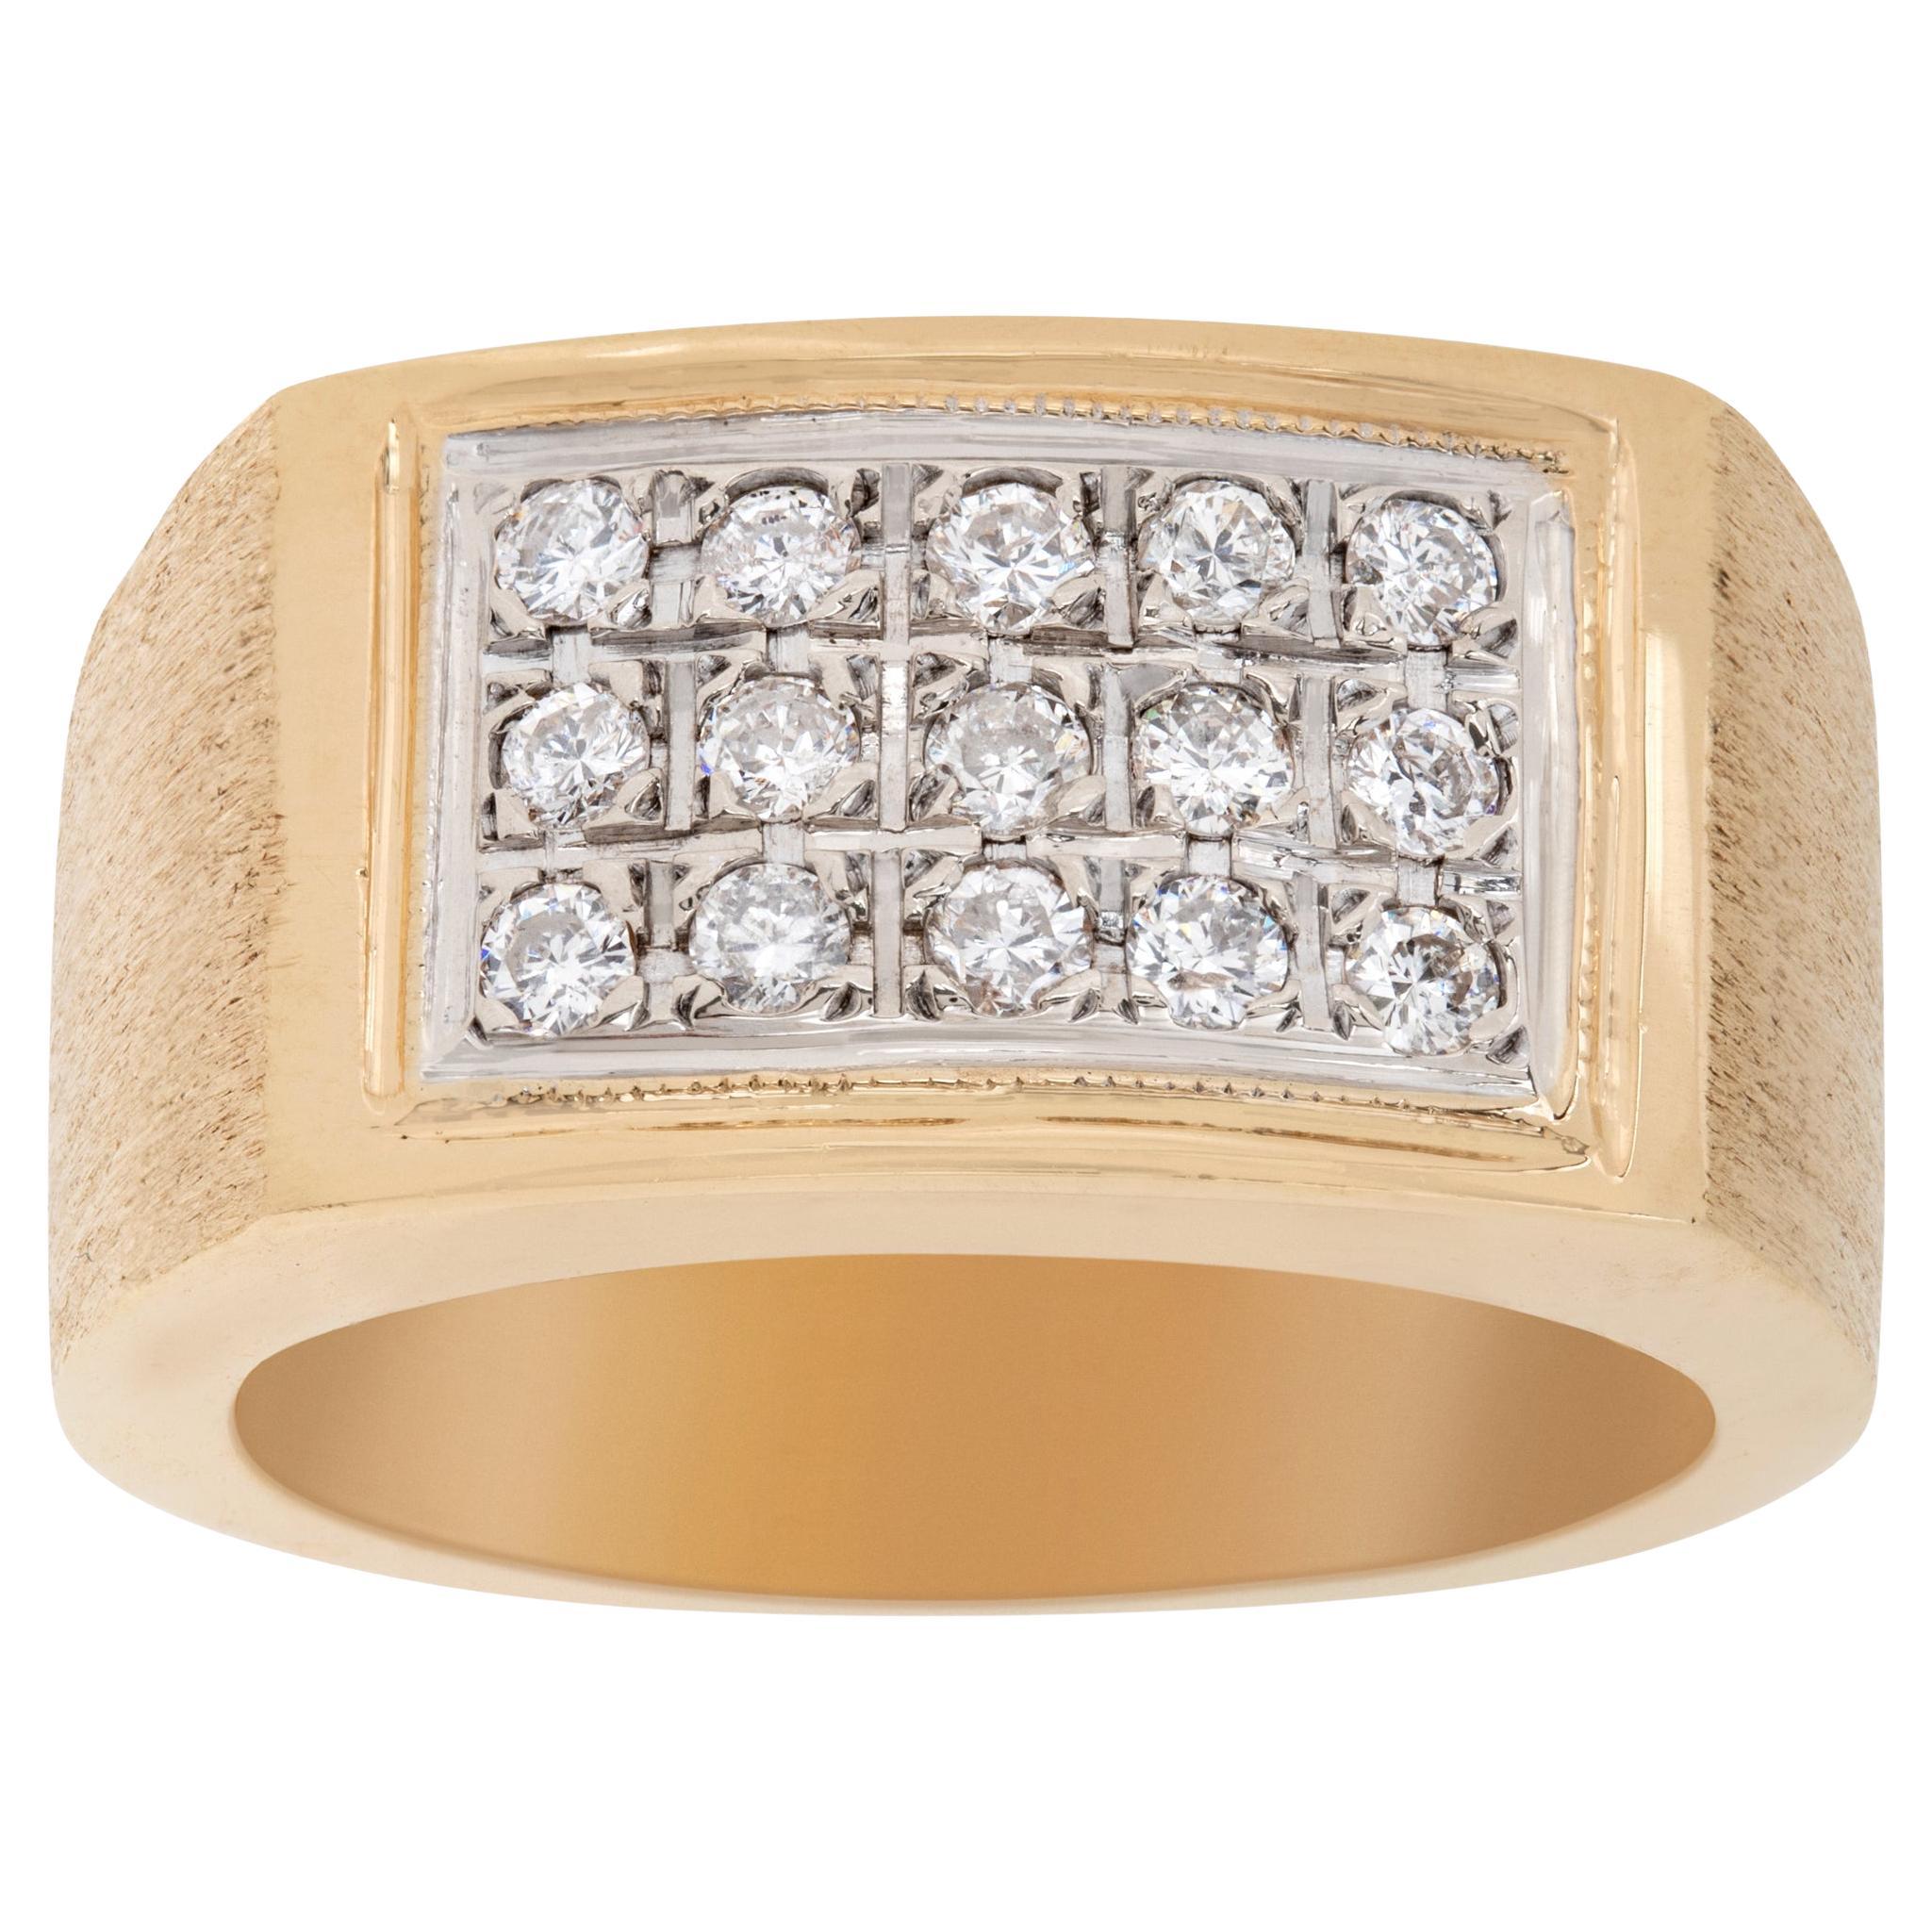 Gents solid diamond ring in 14k yellow gold.  0.70 carats in diamonds.  For Sale